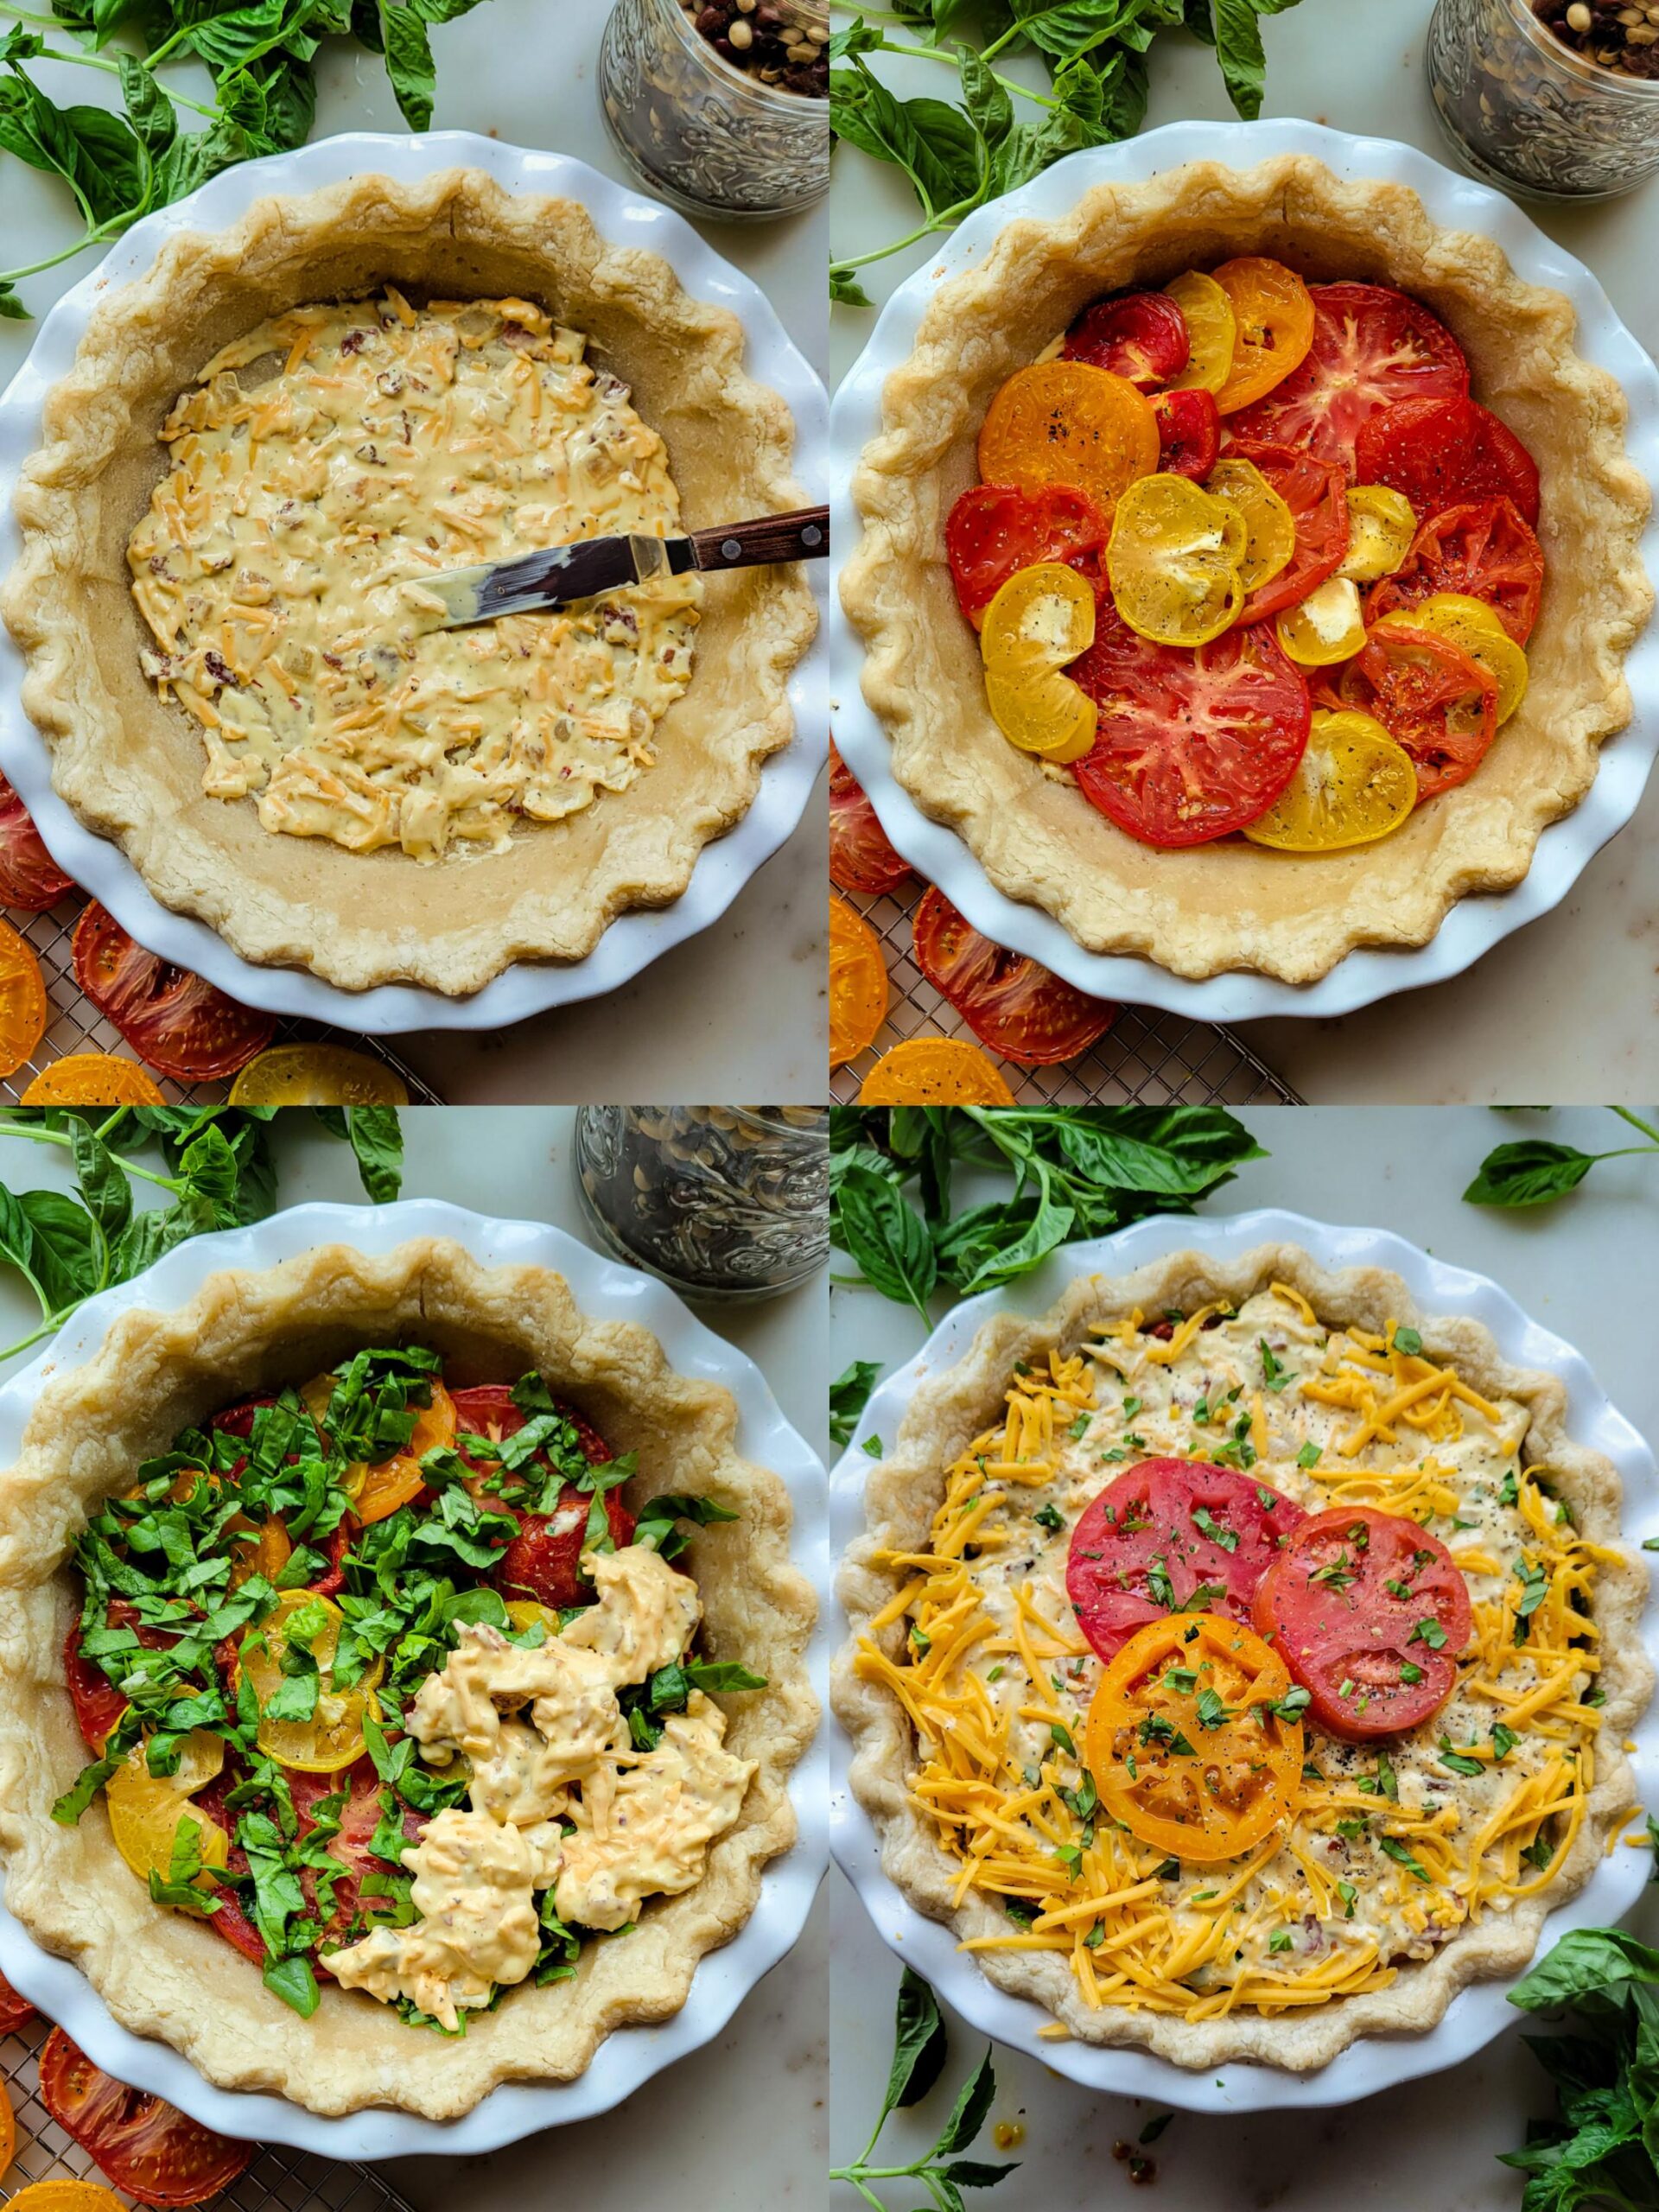 Collage showing the assembling of a Cheesy Tomato Pie